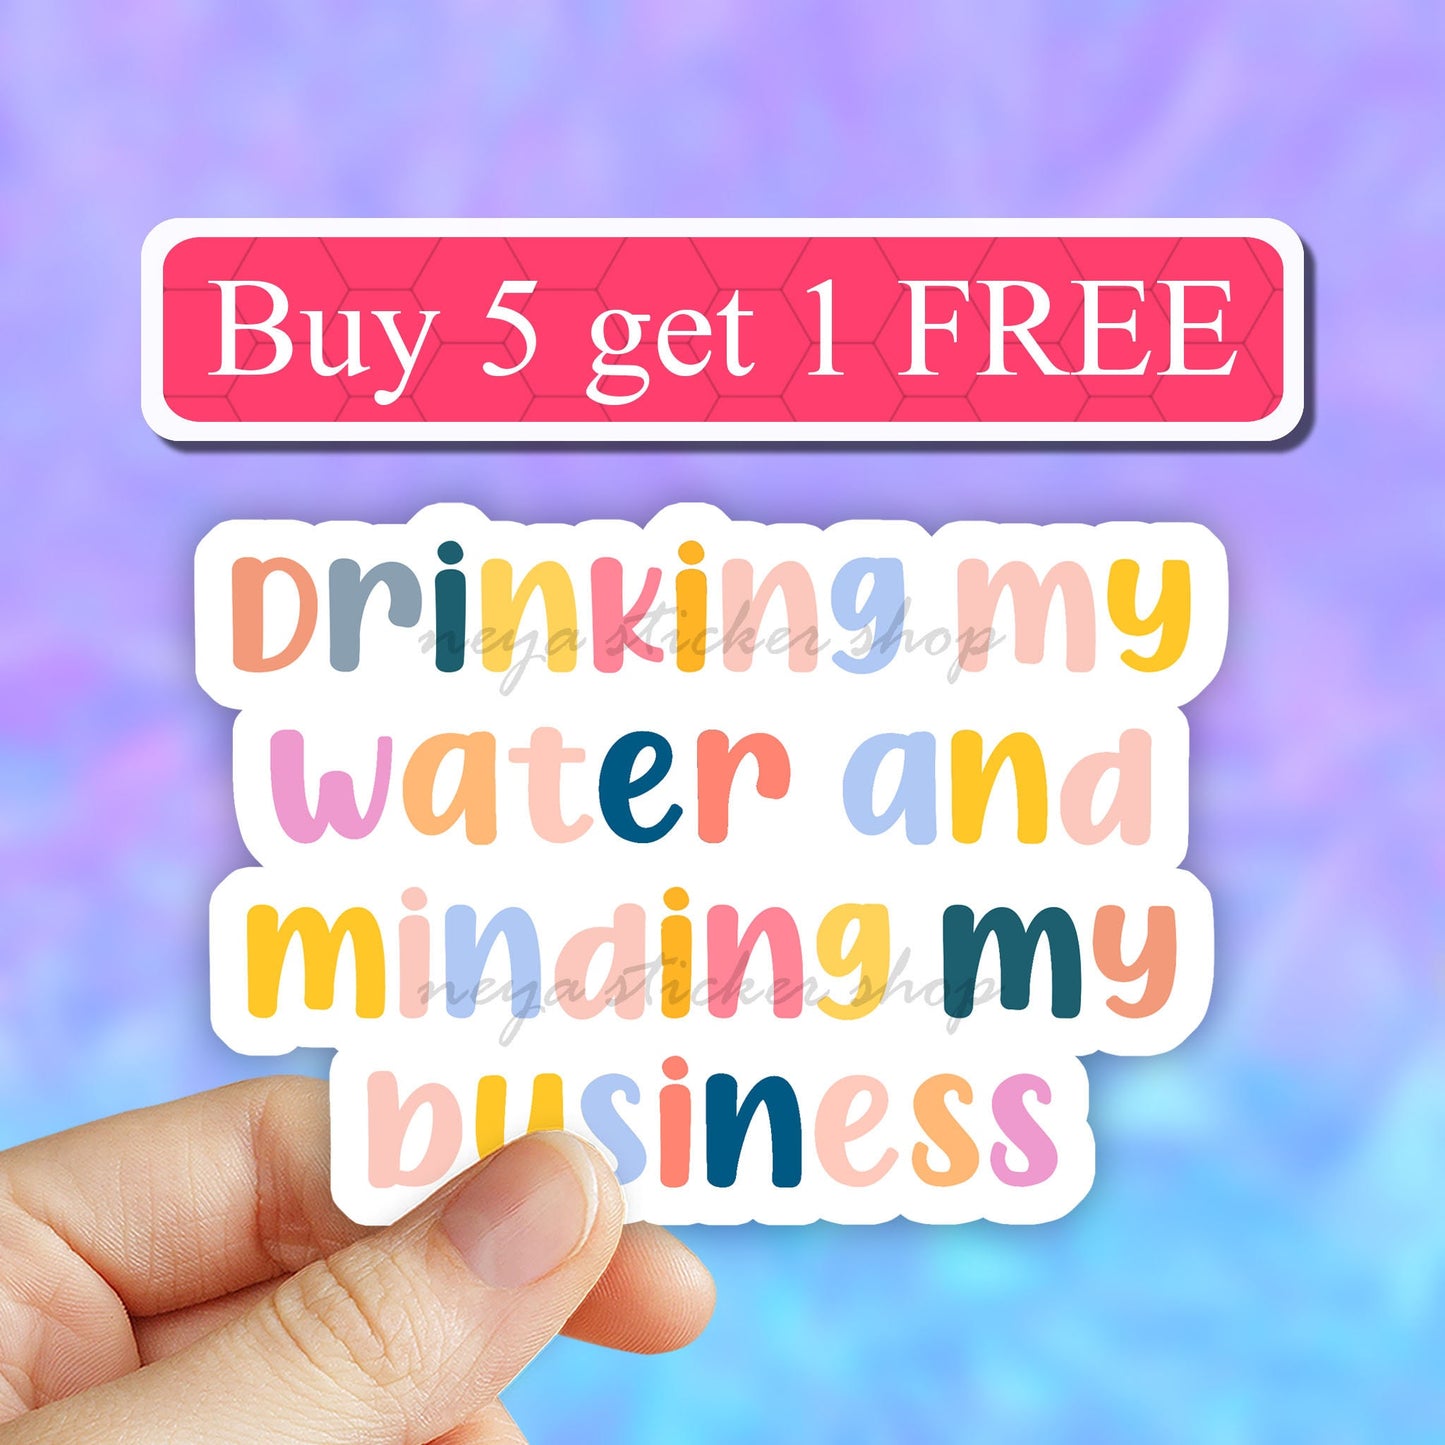 Drinking water and minding my business vinyl sticker, water bottle sticker, hydrate diedrate, funny water bottle decal, waterproof decal